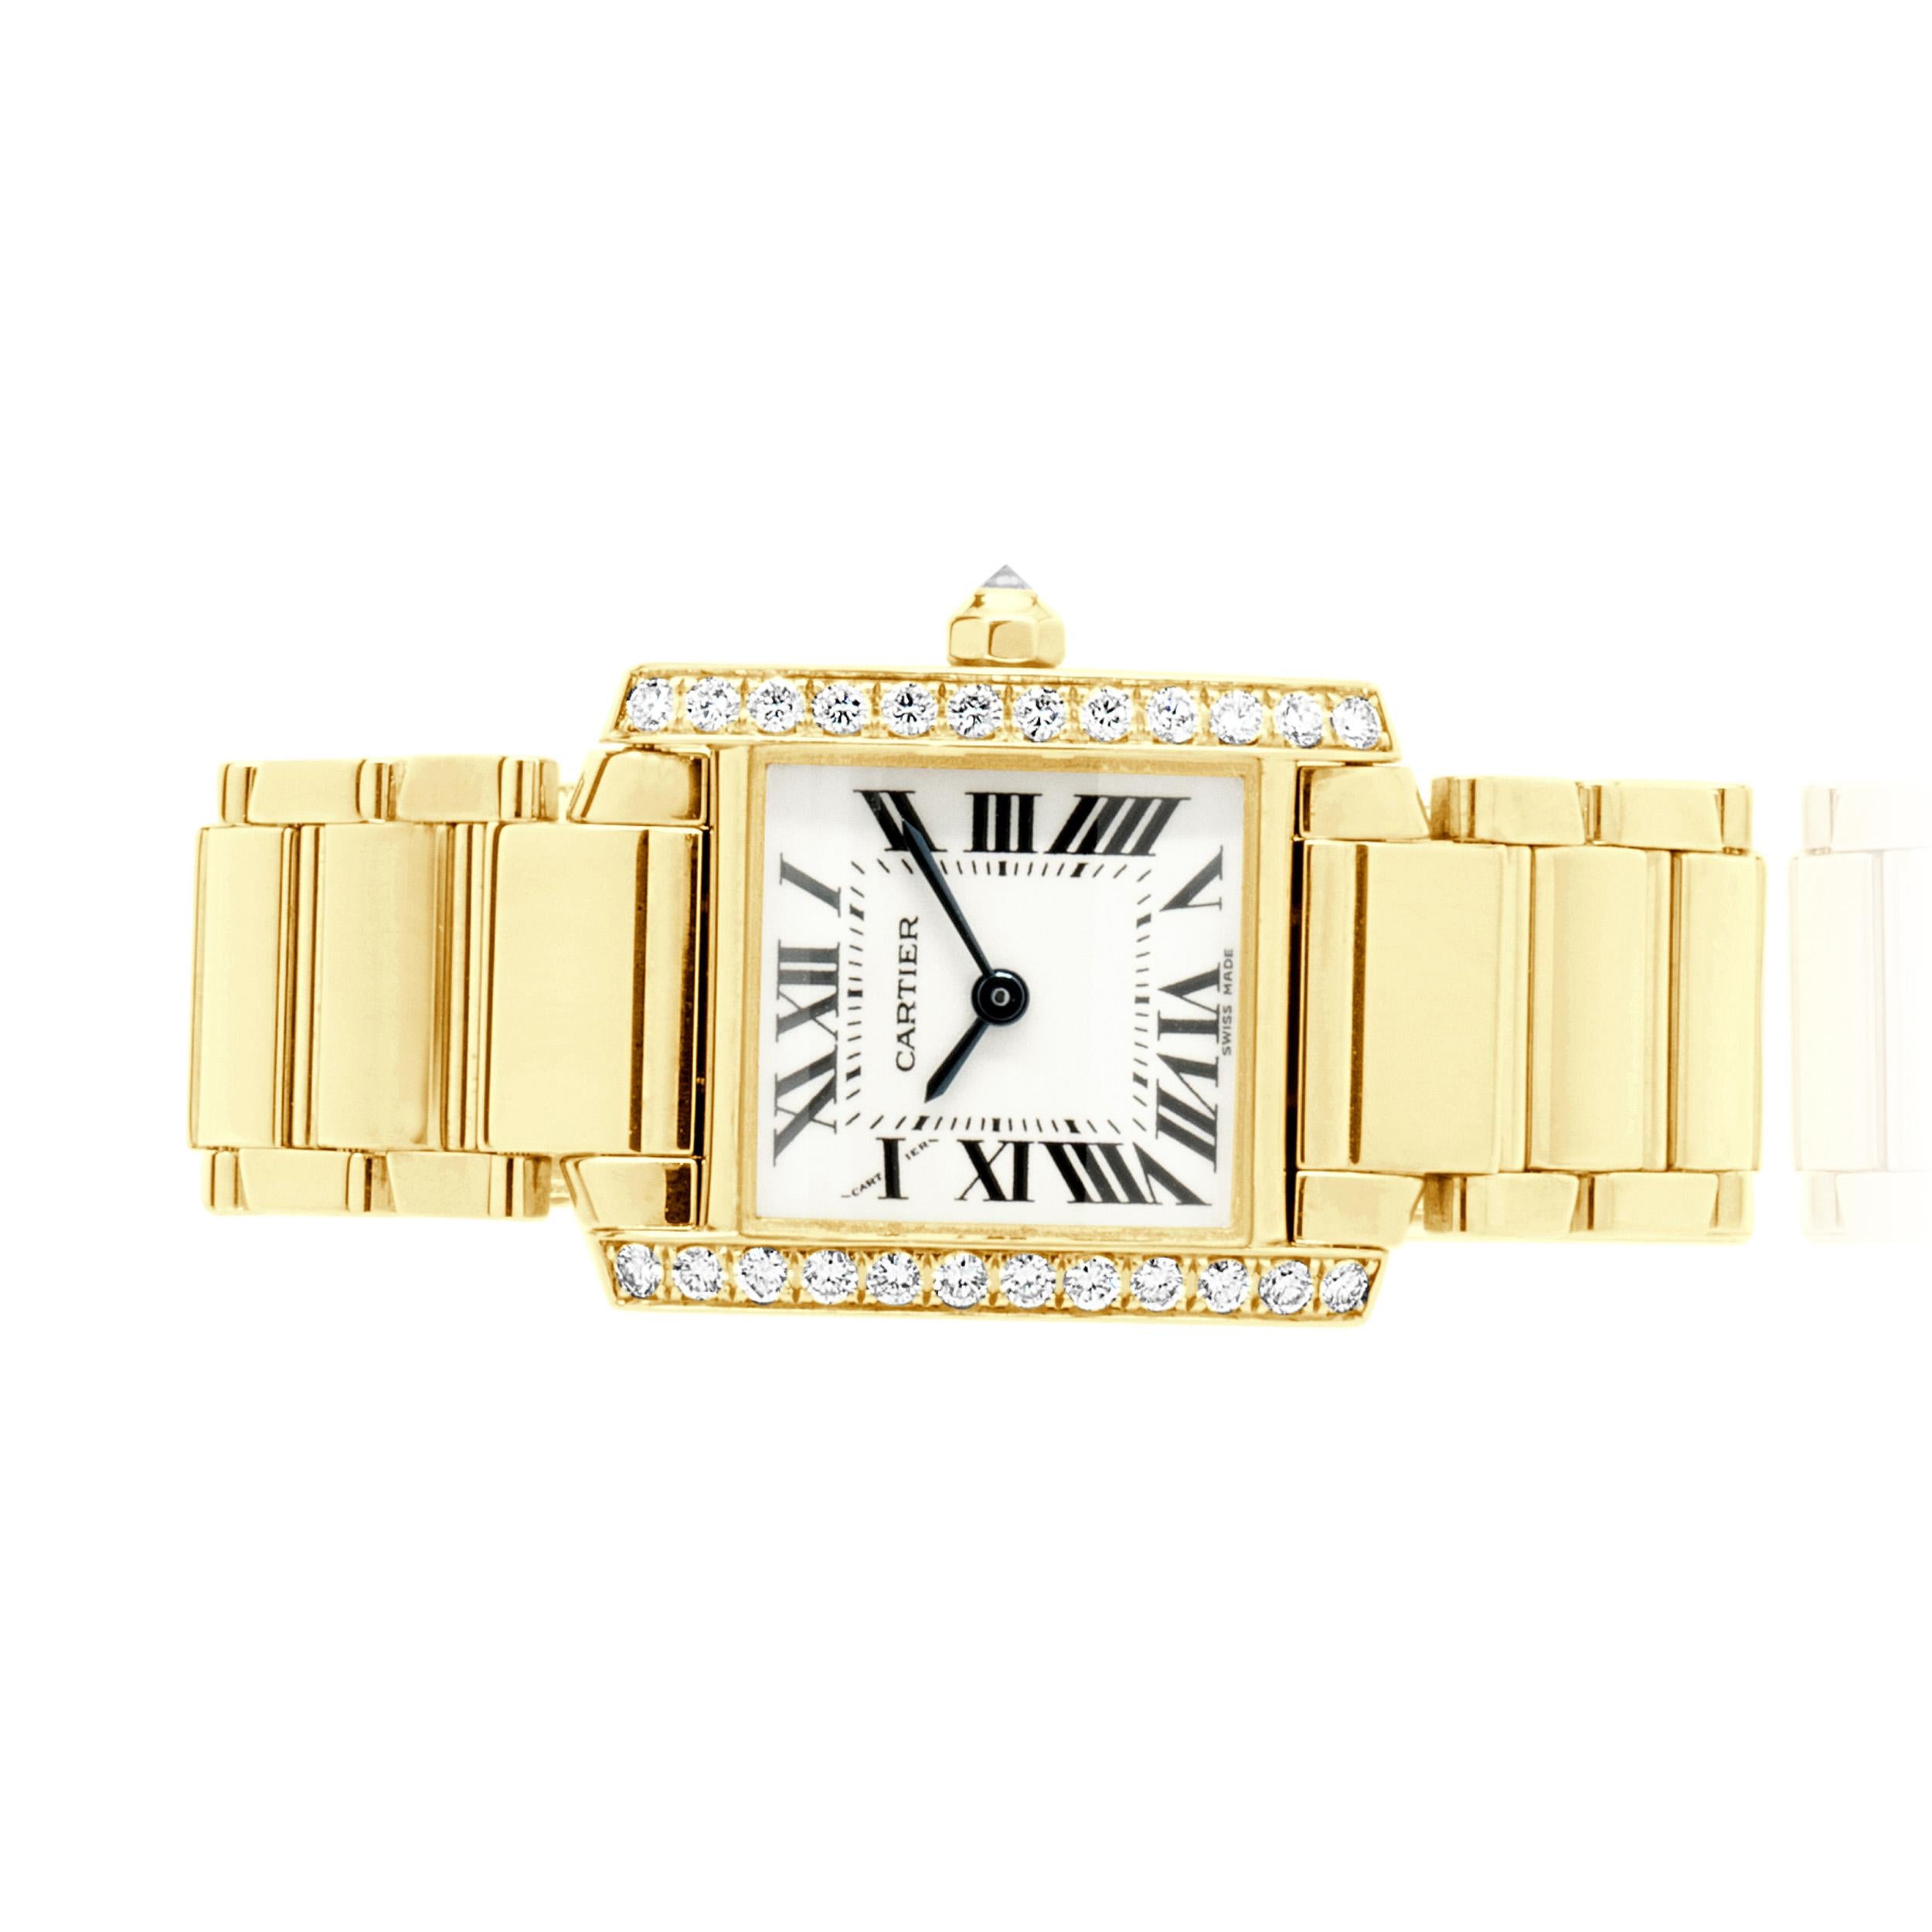 Movement: automatic
Function: hours, minutes, seconds, date
Case: 25x20mm 18K yellow gold rectangular case, diamond bezel, push pull crown, sapphire crystal
Dial: white roman dial, steel sword sweeping hands
Band: Cartier 18K yellow gold tank